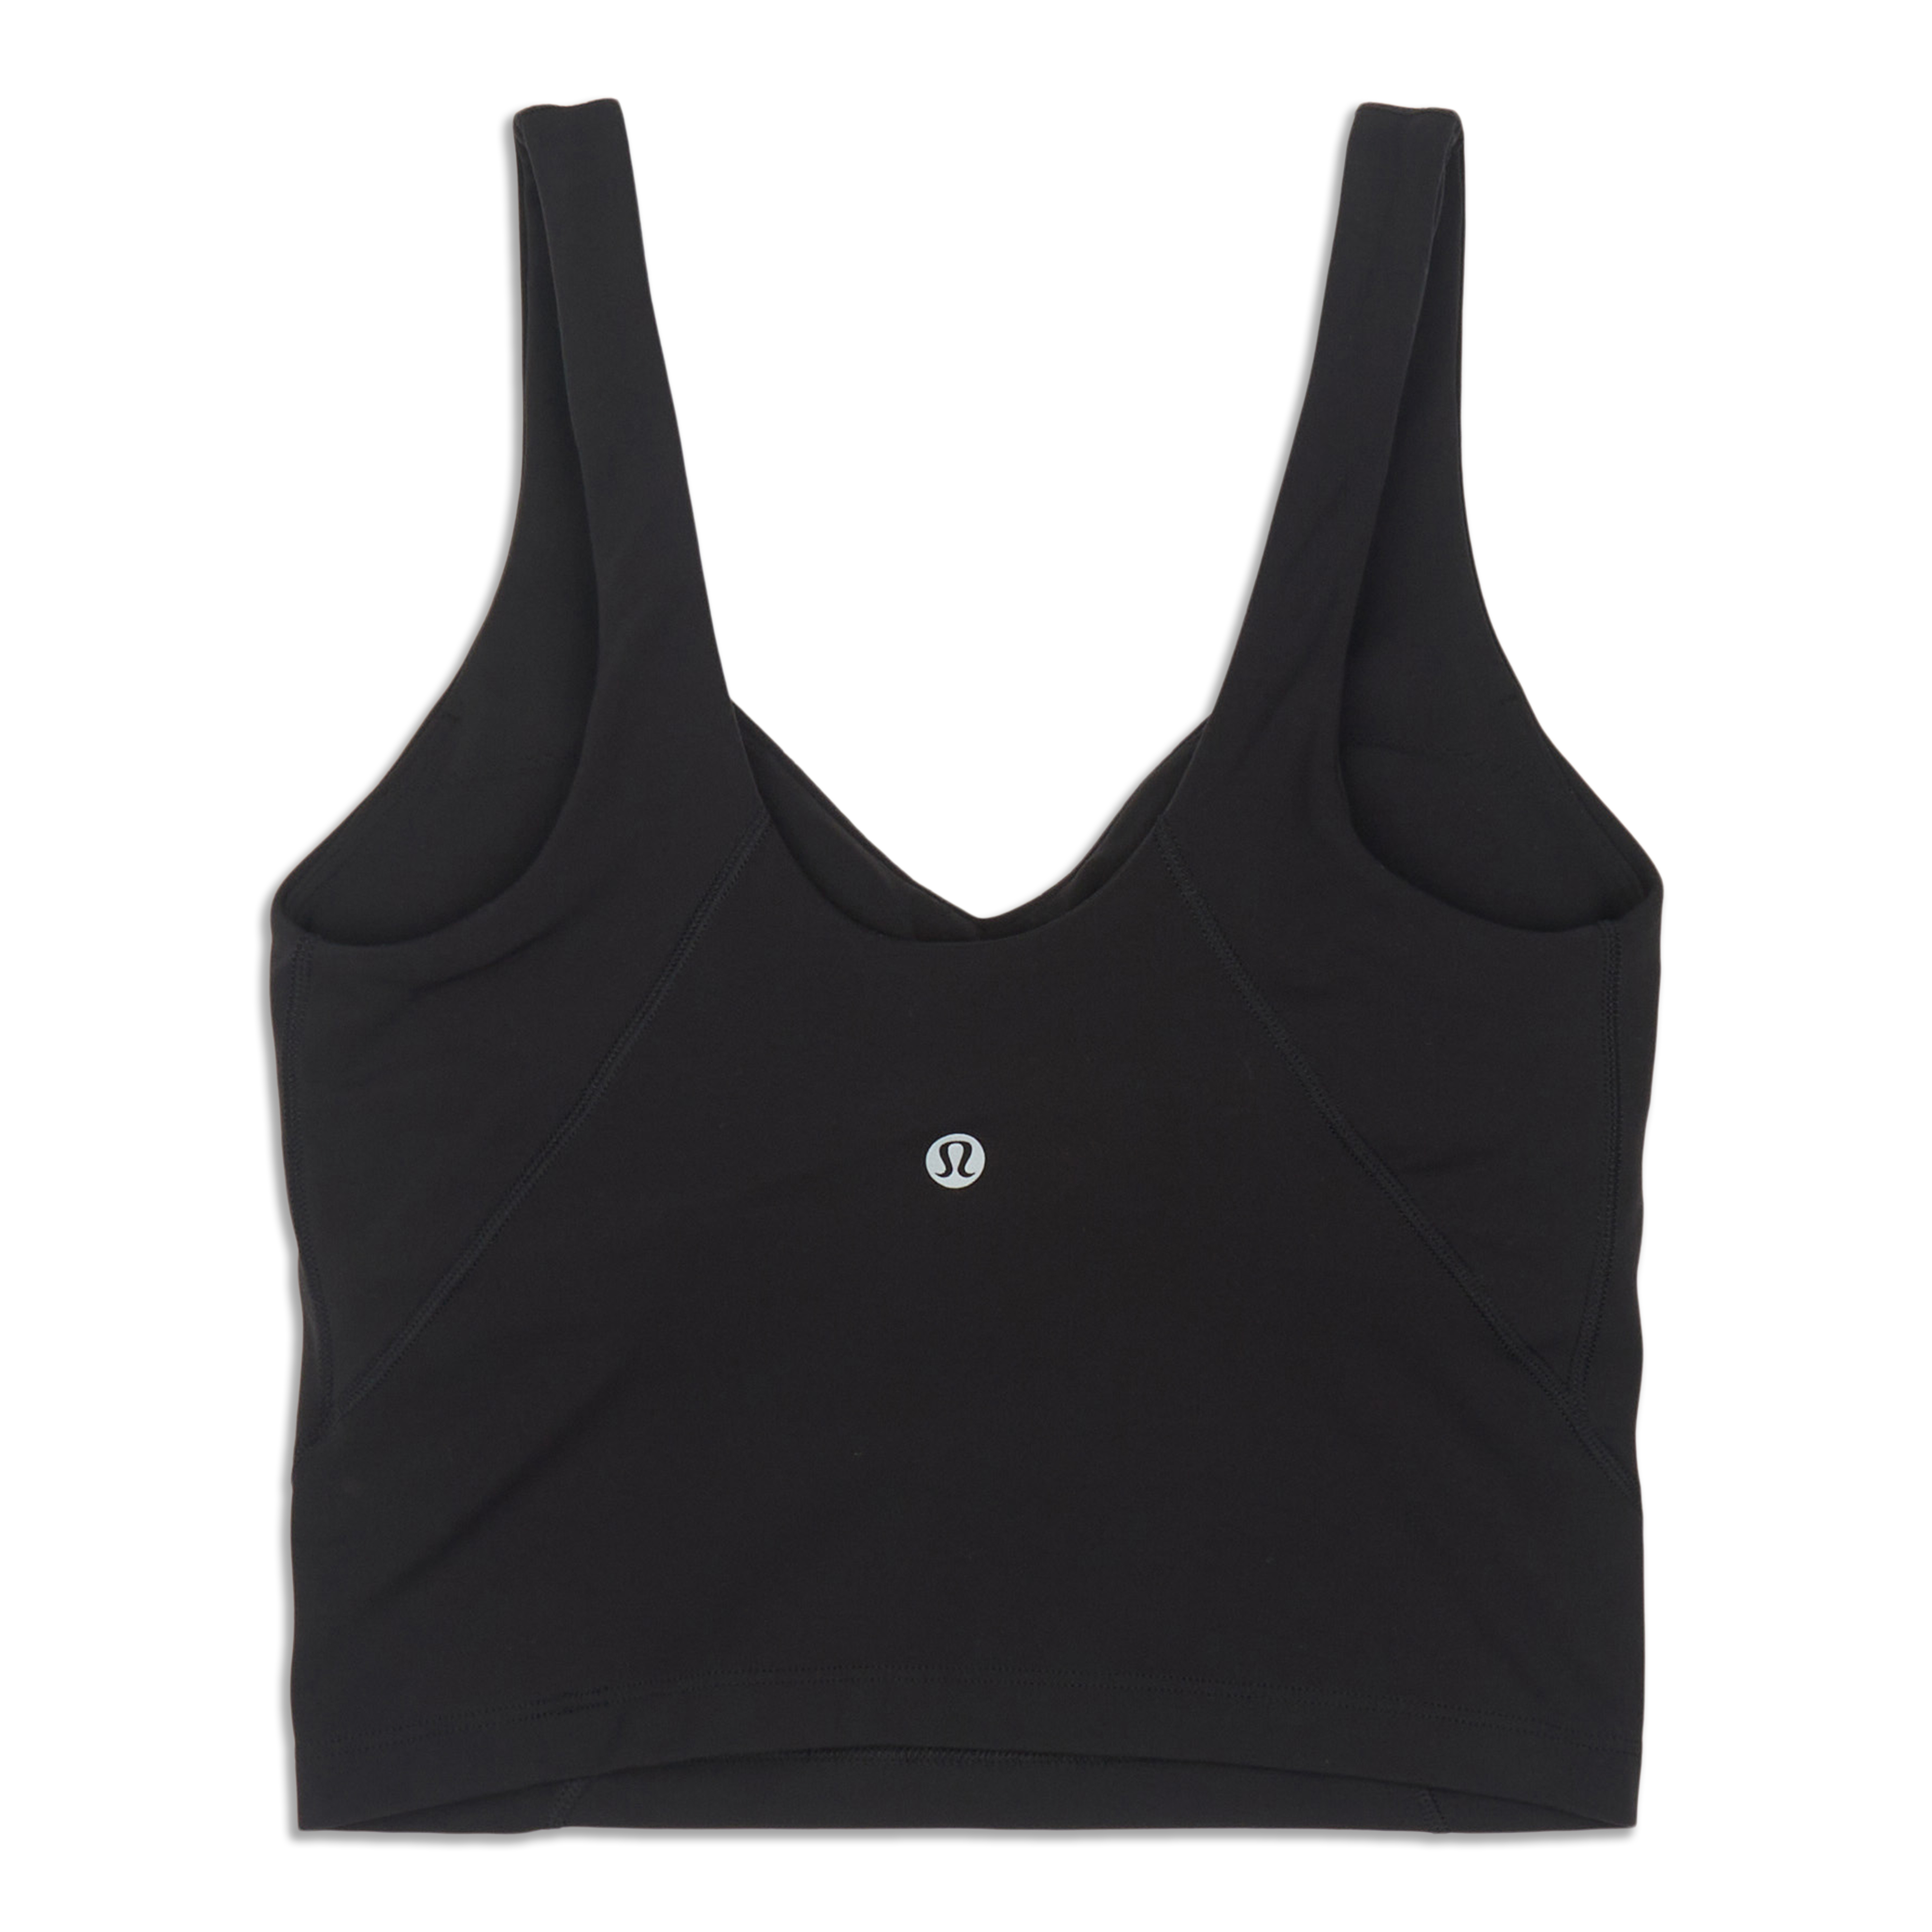 Lululemon Align Tank White Size 2 - $45 (22% Off Retail) - From